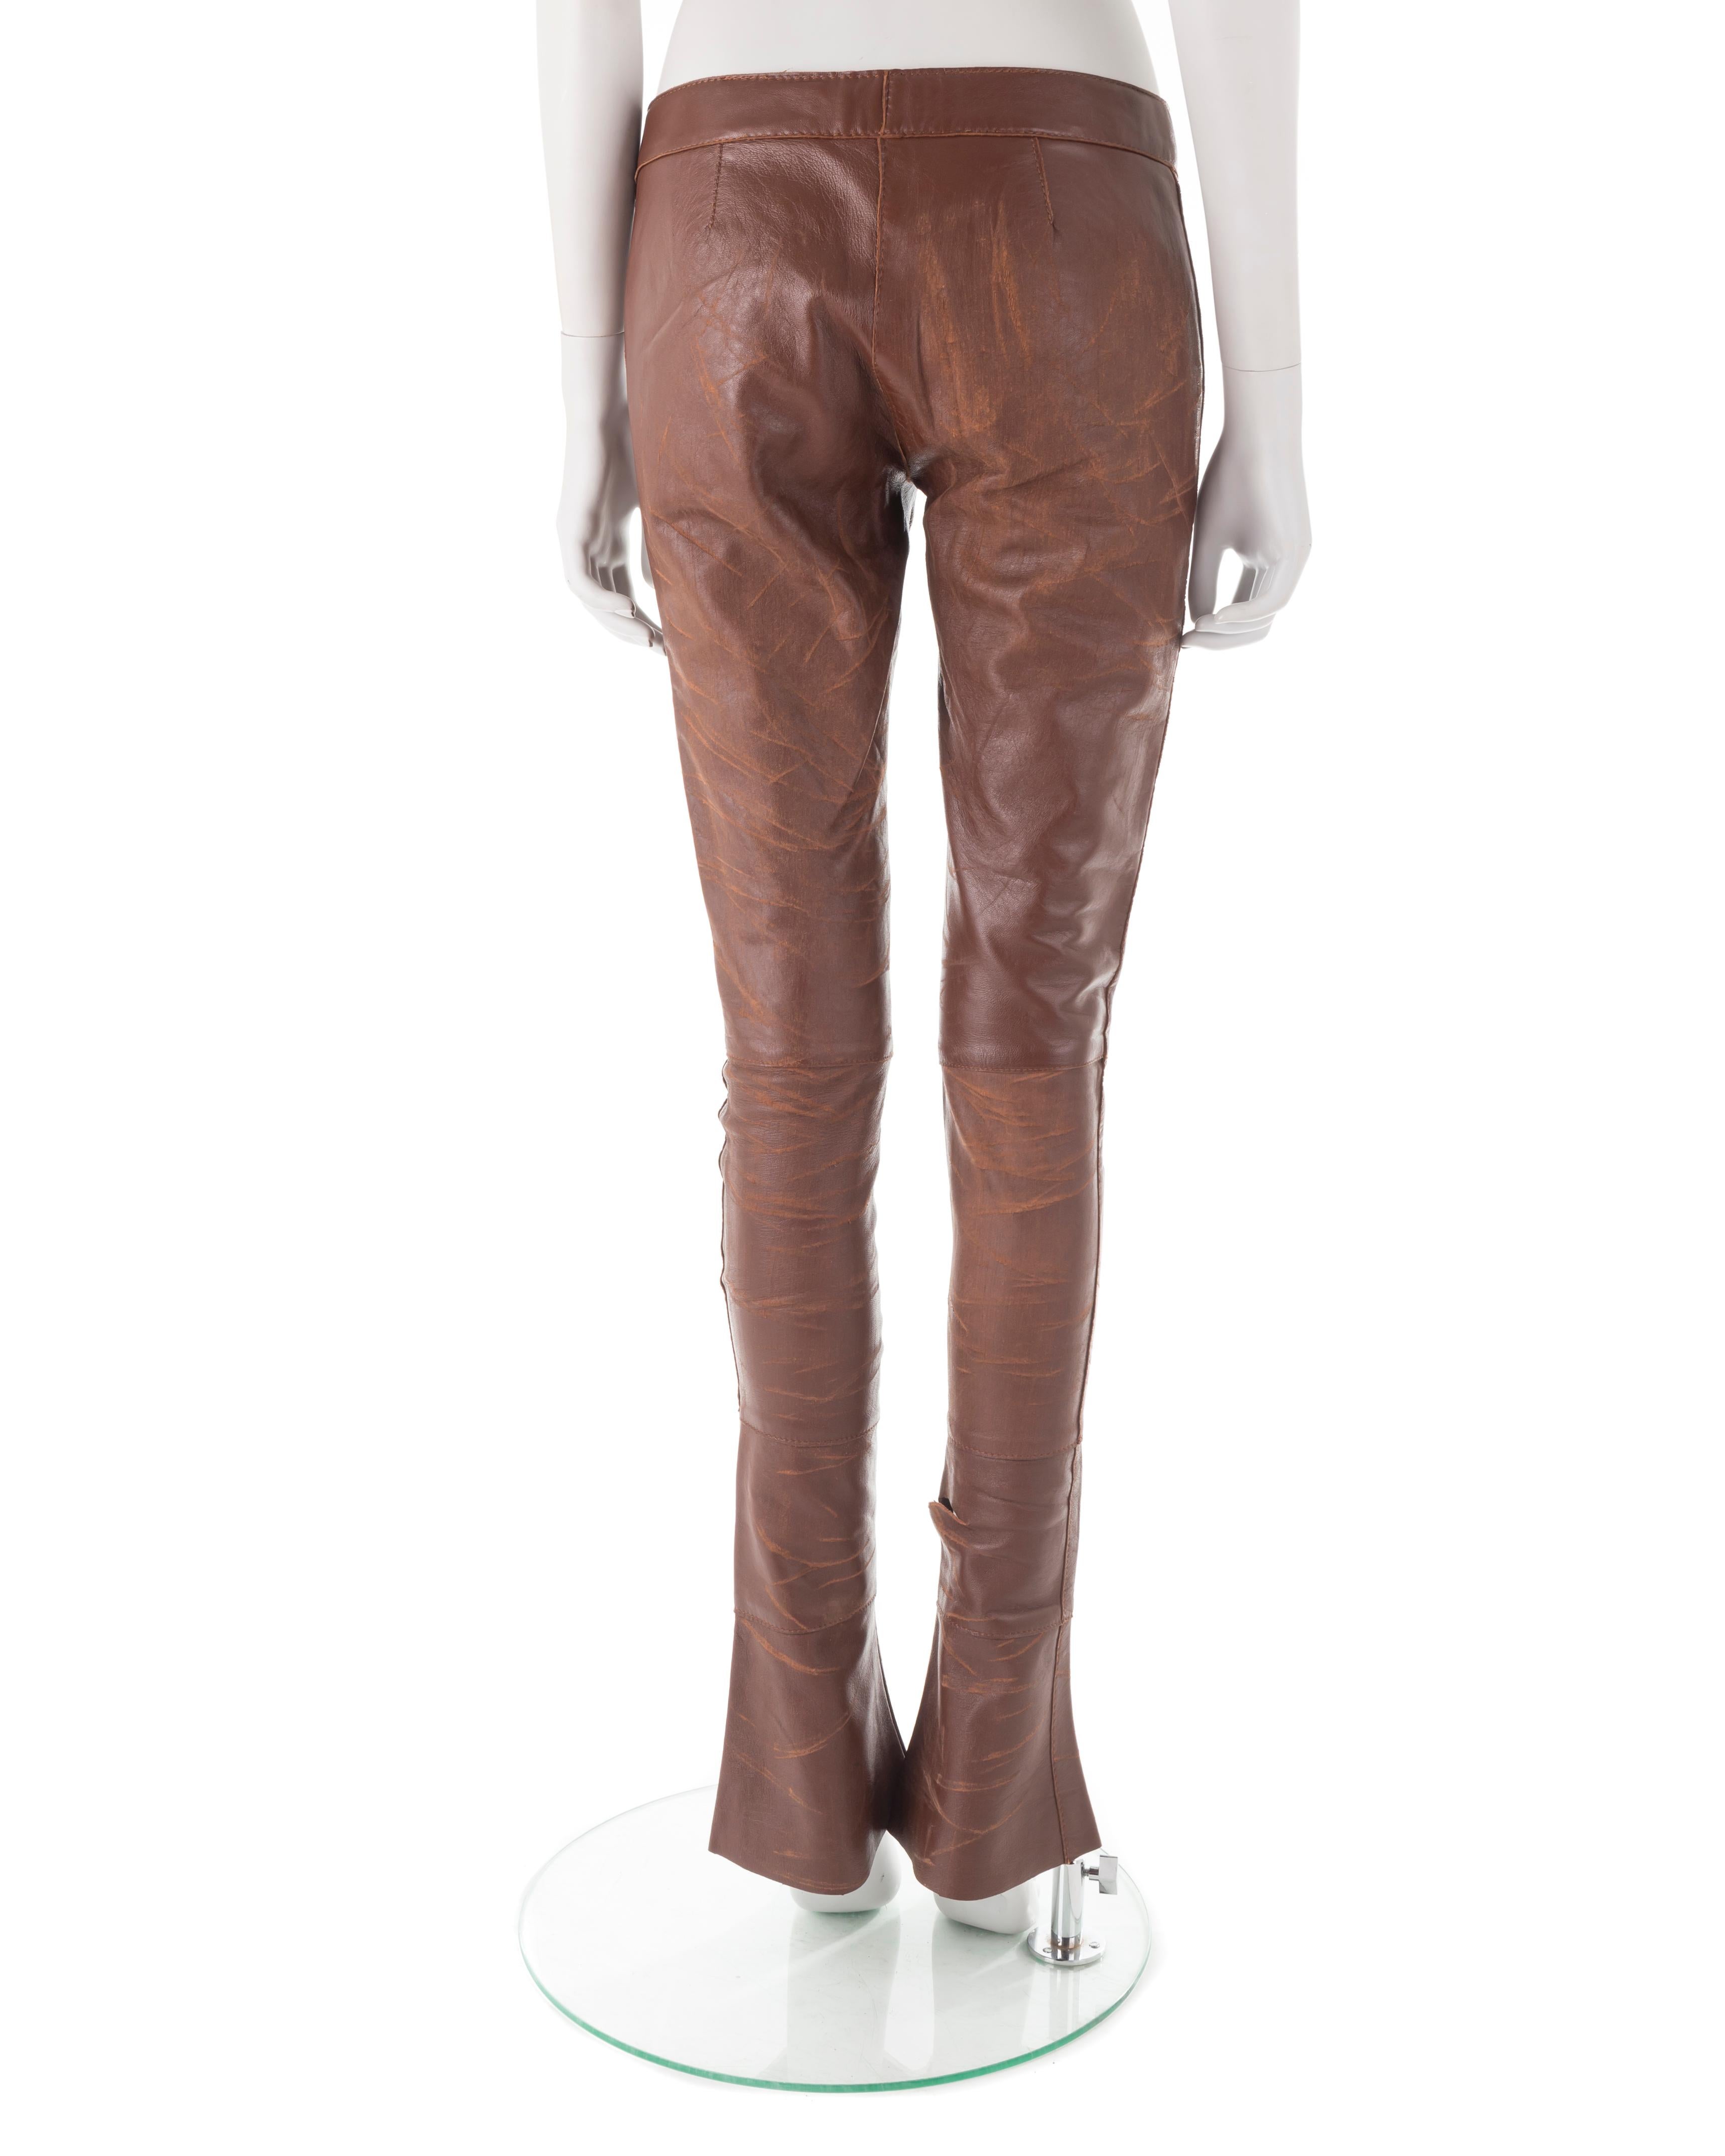 Dolce & Gabbana F/W 2001 distressed extra-long leather pants In Excellent Condition For Sale In Rome, IT